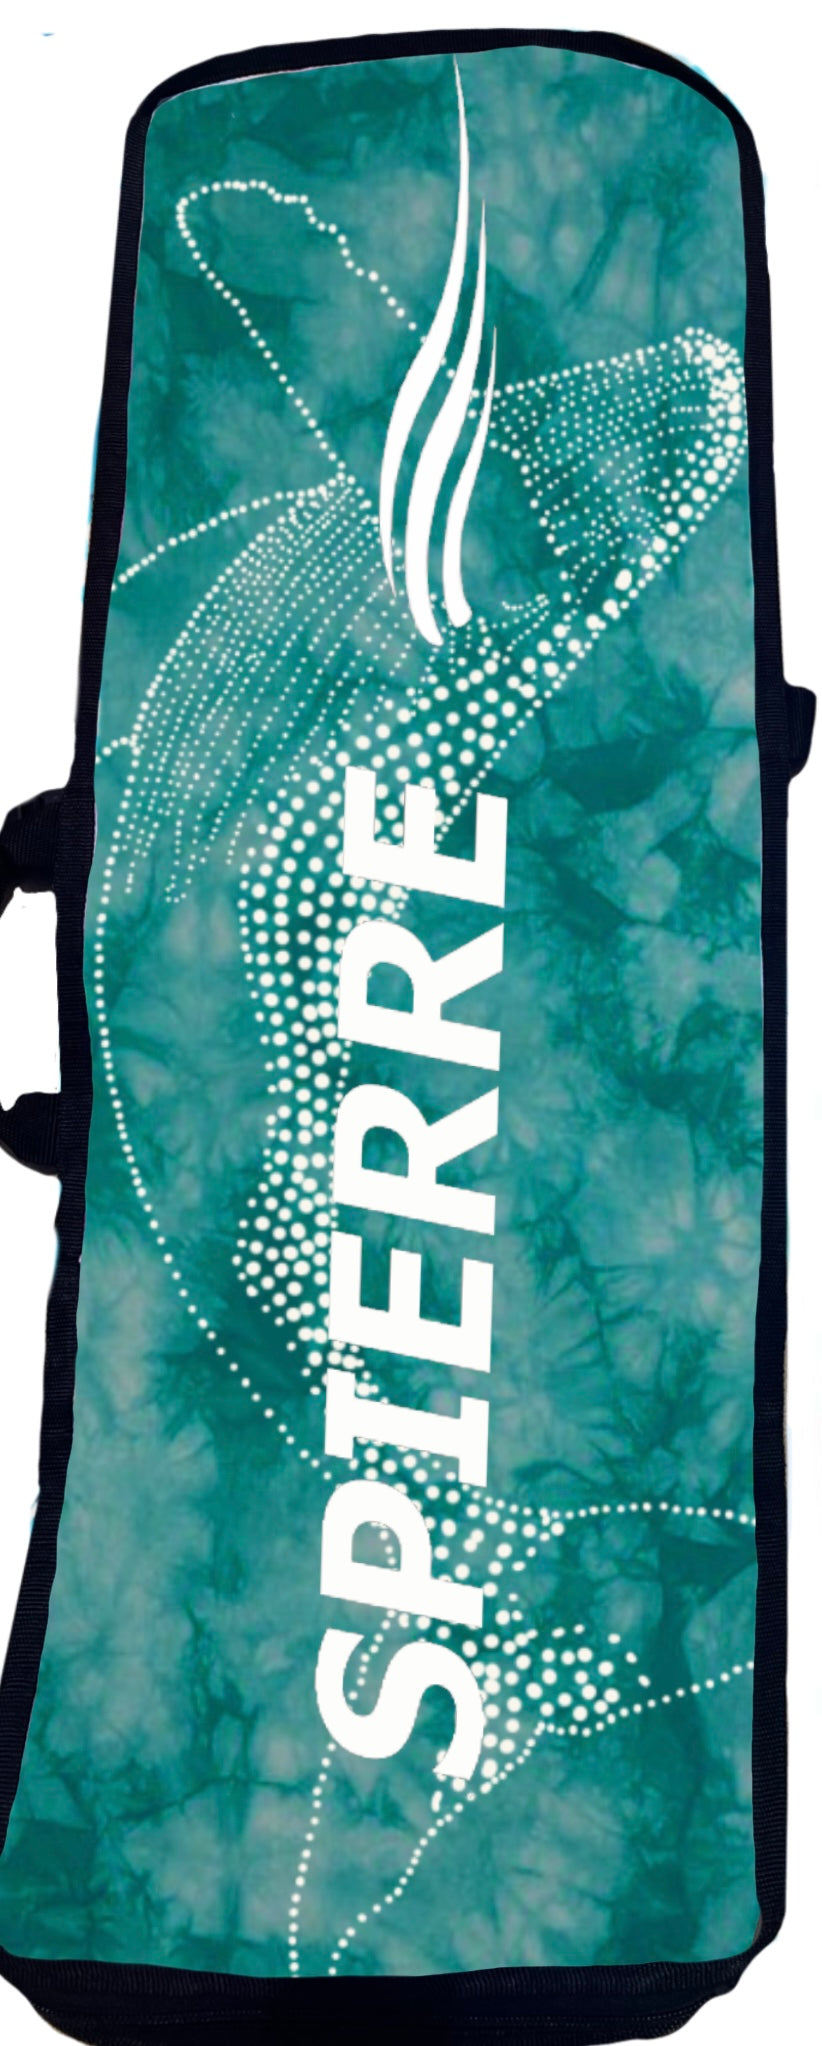 Spierre Padded Travel Fin Bag - Whale Dance Design